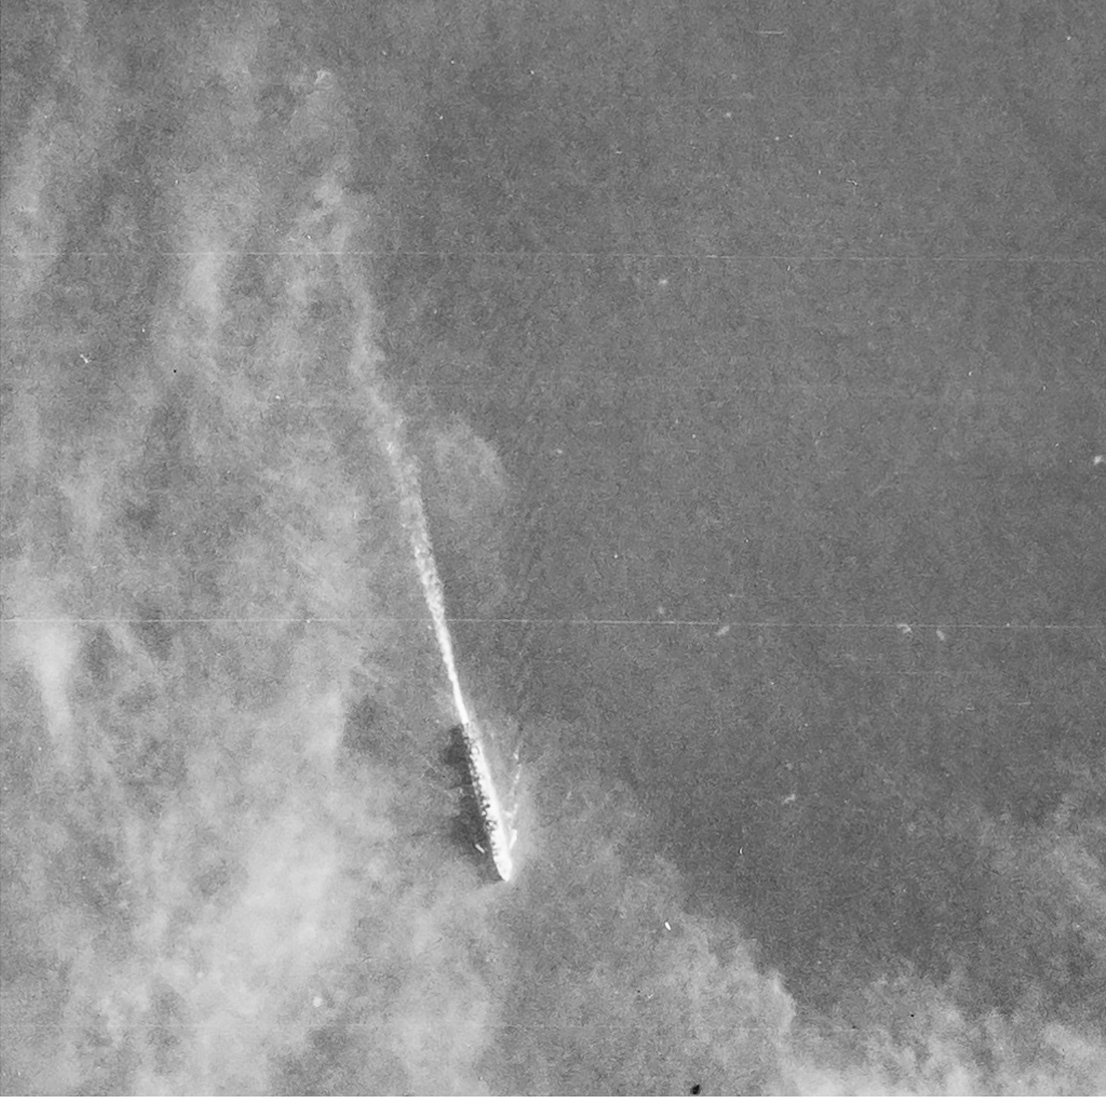 Detail from a black and white vertical aerial photograph, showing a warship at sea. A straight line of wake trails behind the ship. Above the ship, wafts of smoke partly obscure the view.